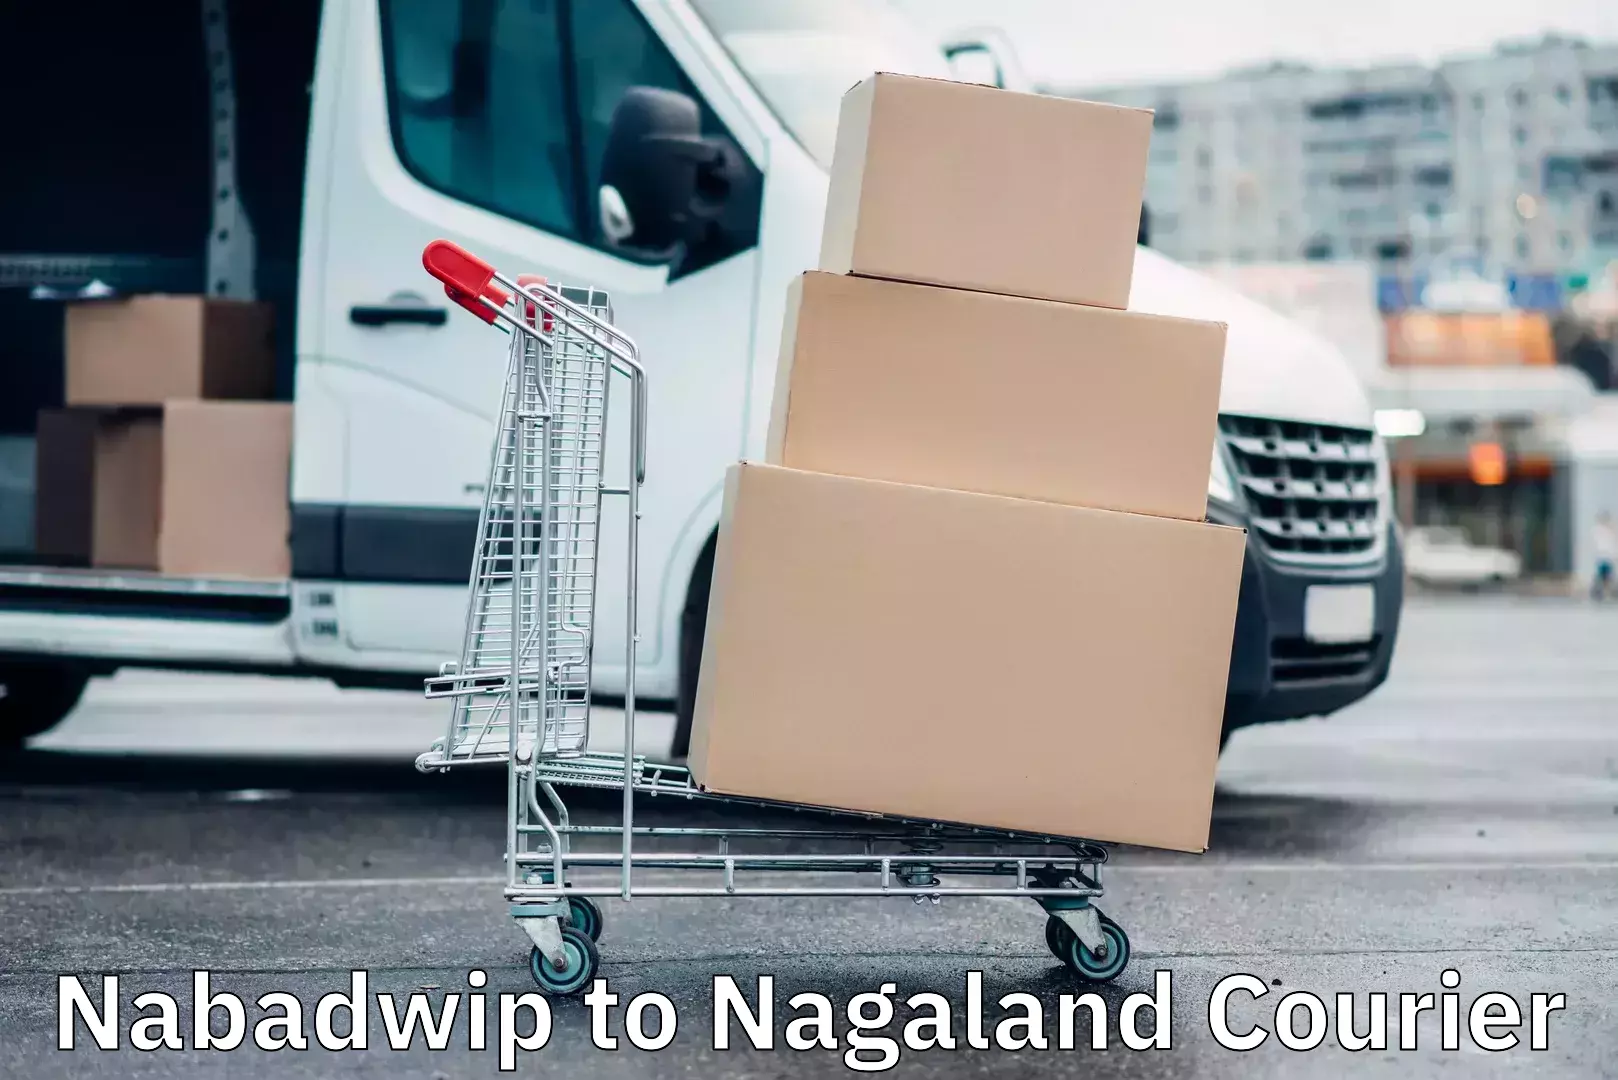 Discount courier rates Nabadwip to Nagaland